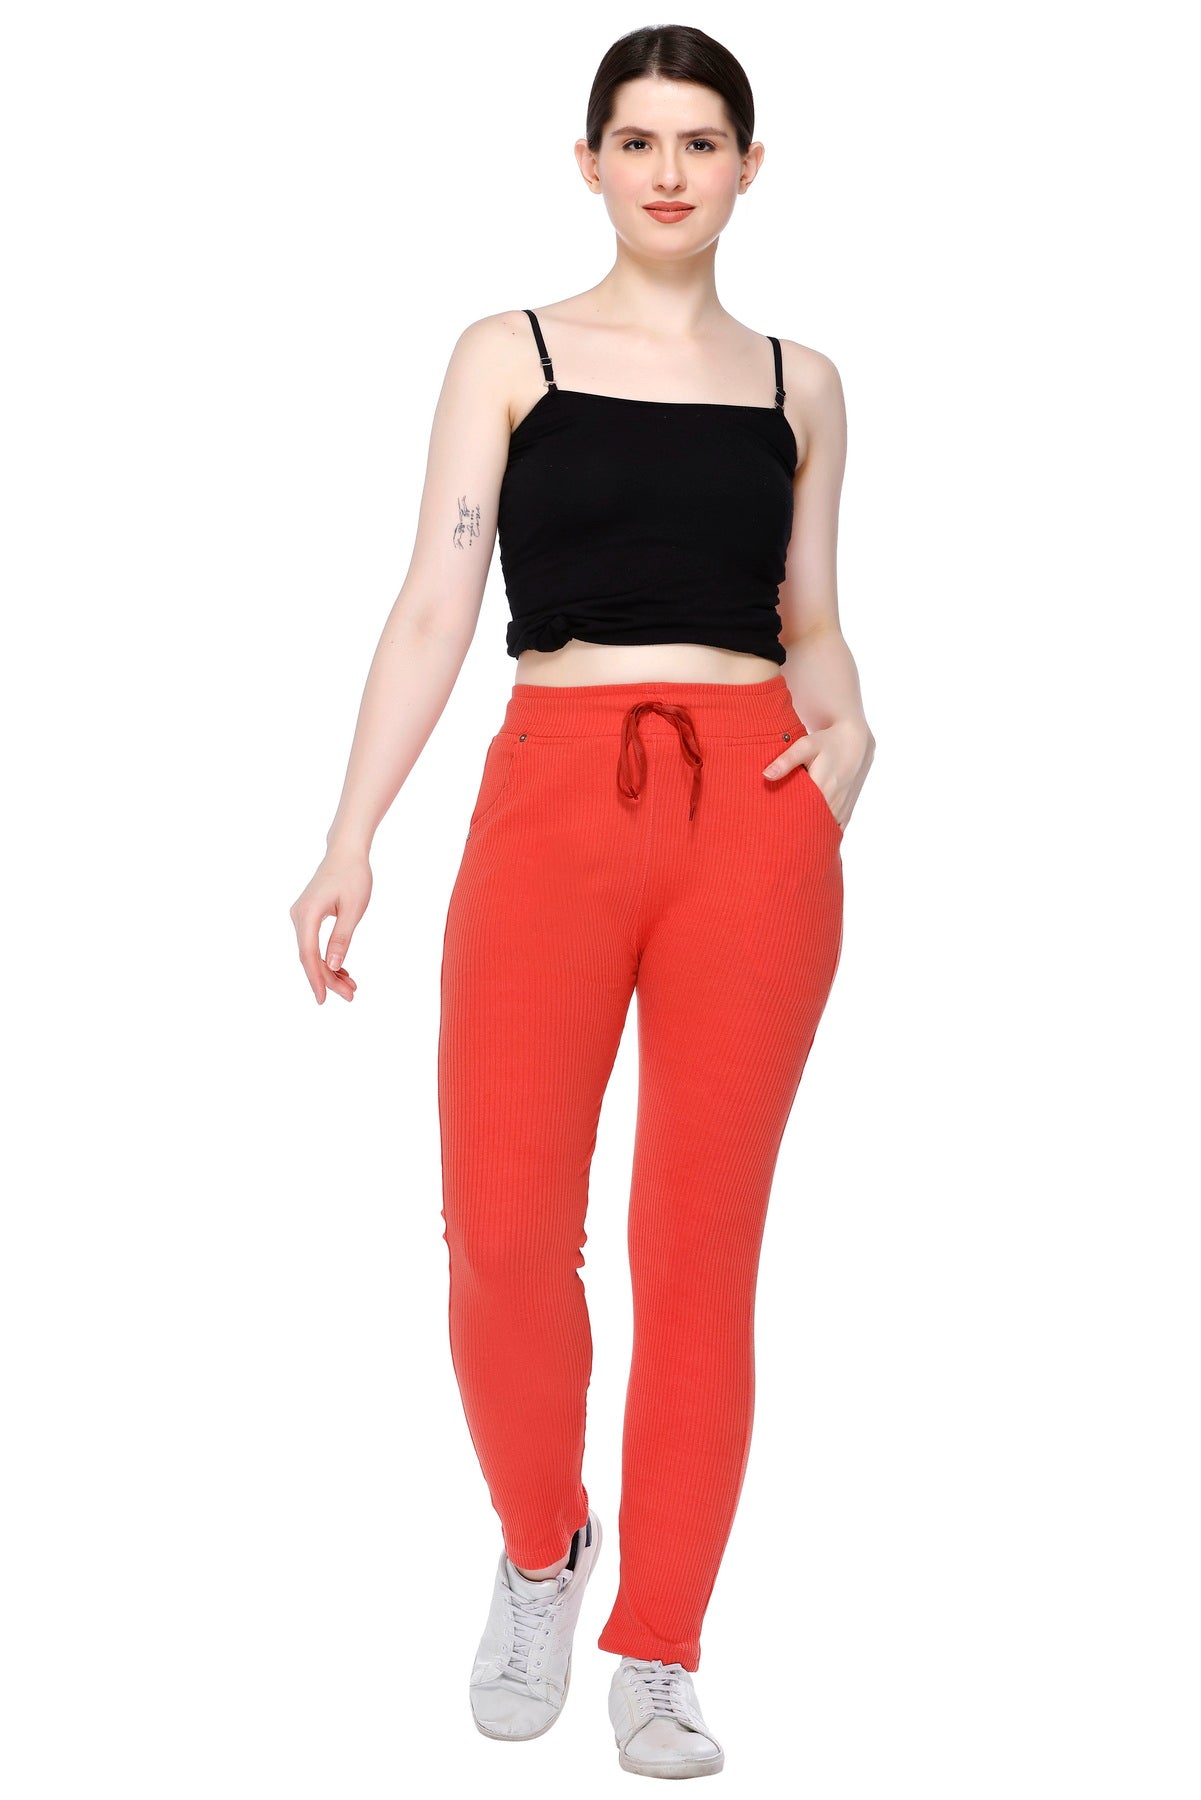 Buy Stretchable Slim Fit Yoga Workout Gym Pants with Pockets